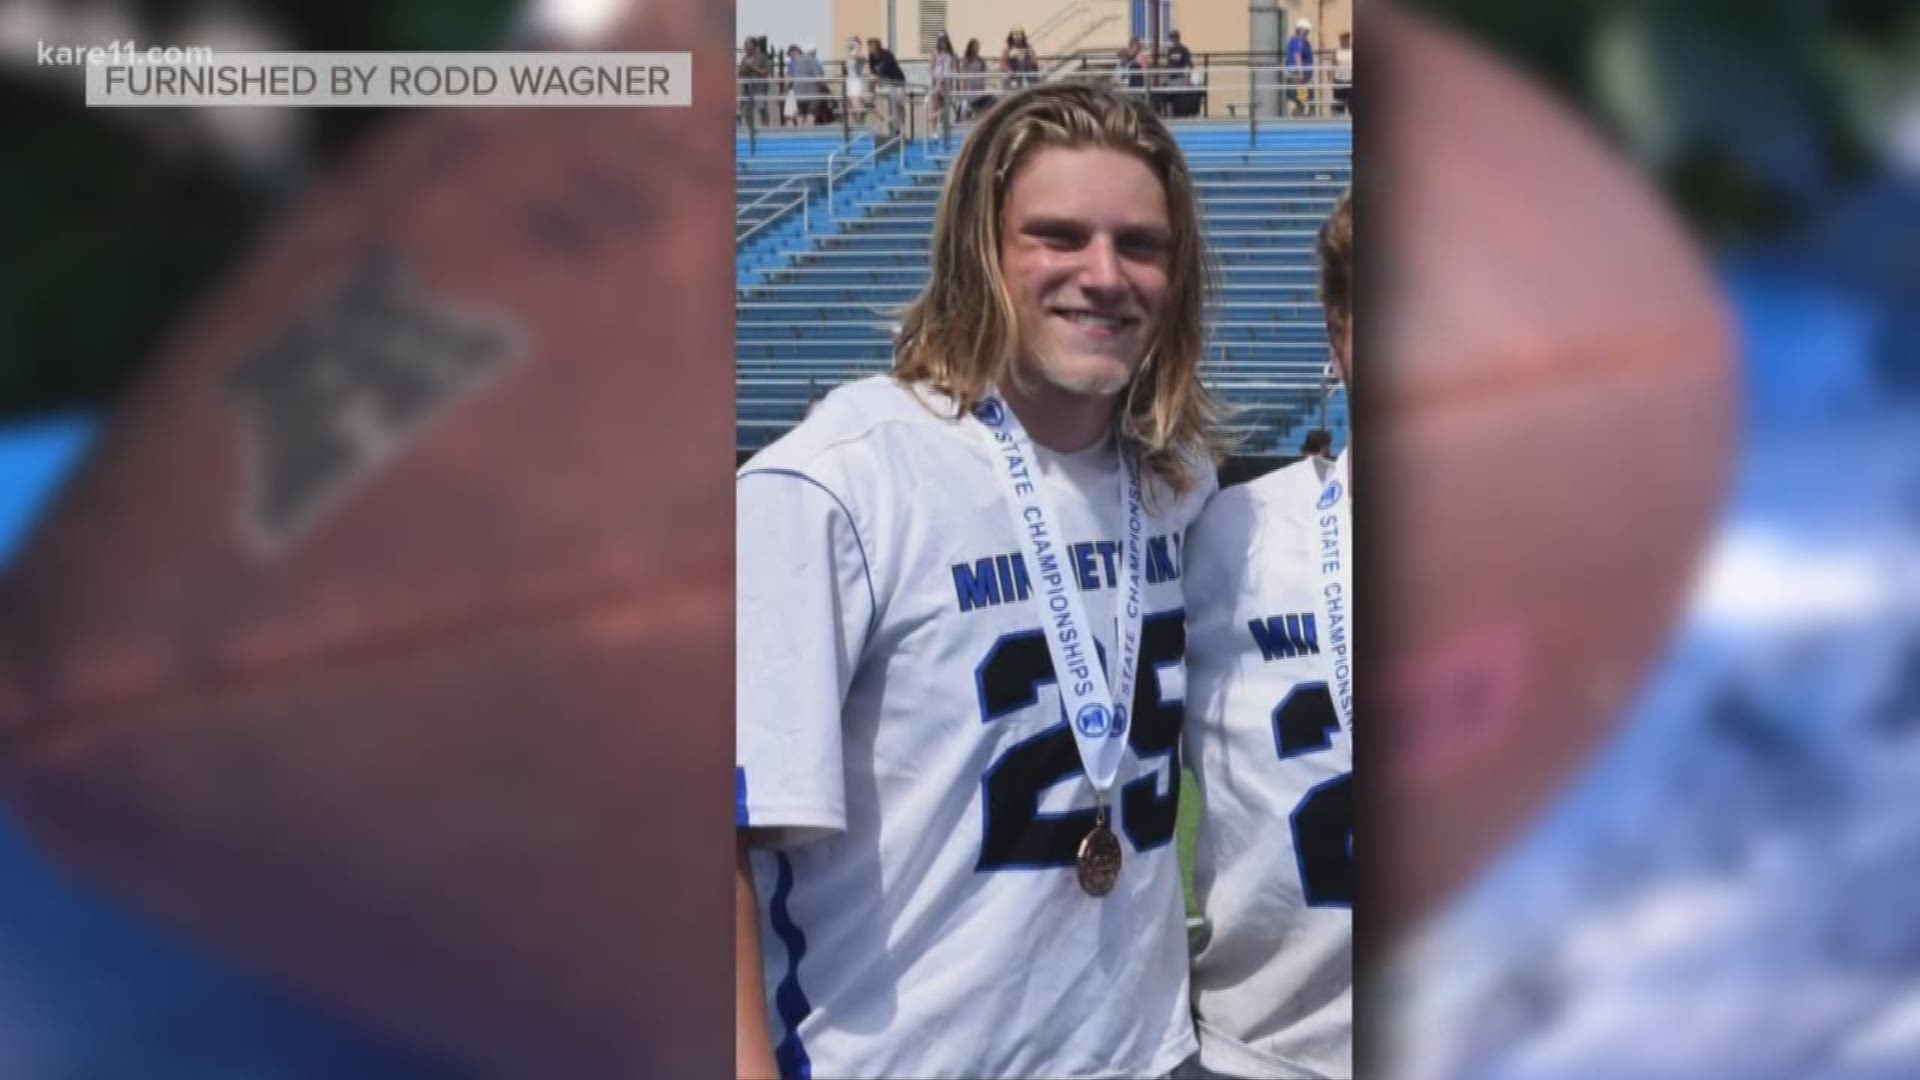 Teen killed in officer-involved shooting remembered by community